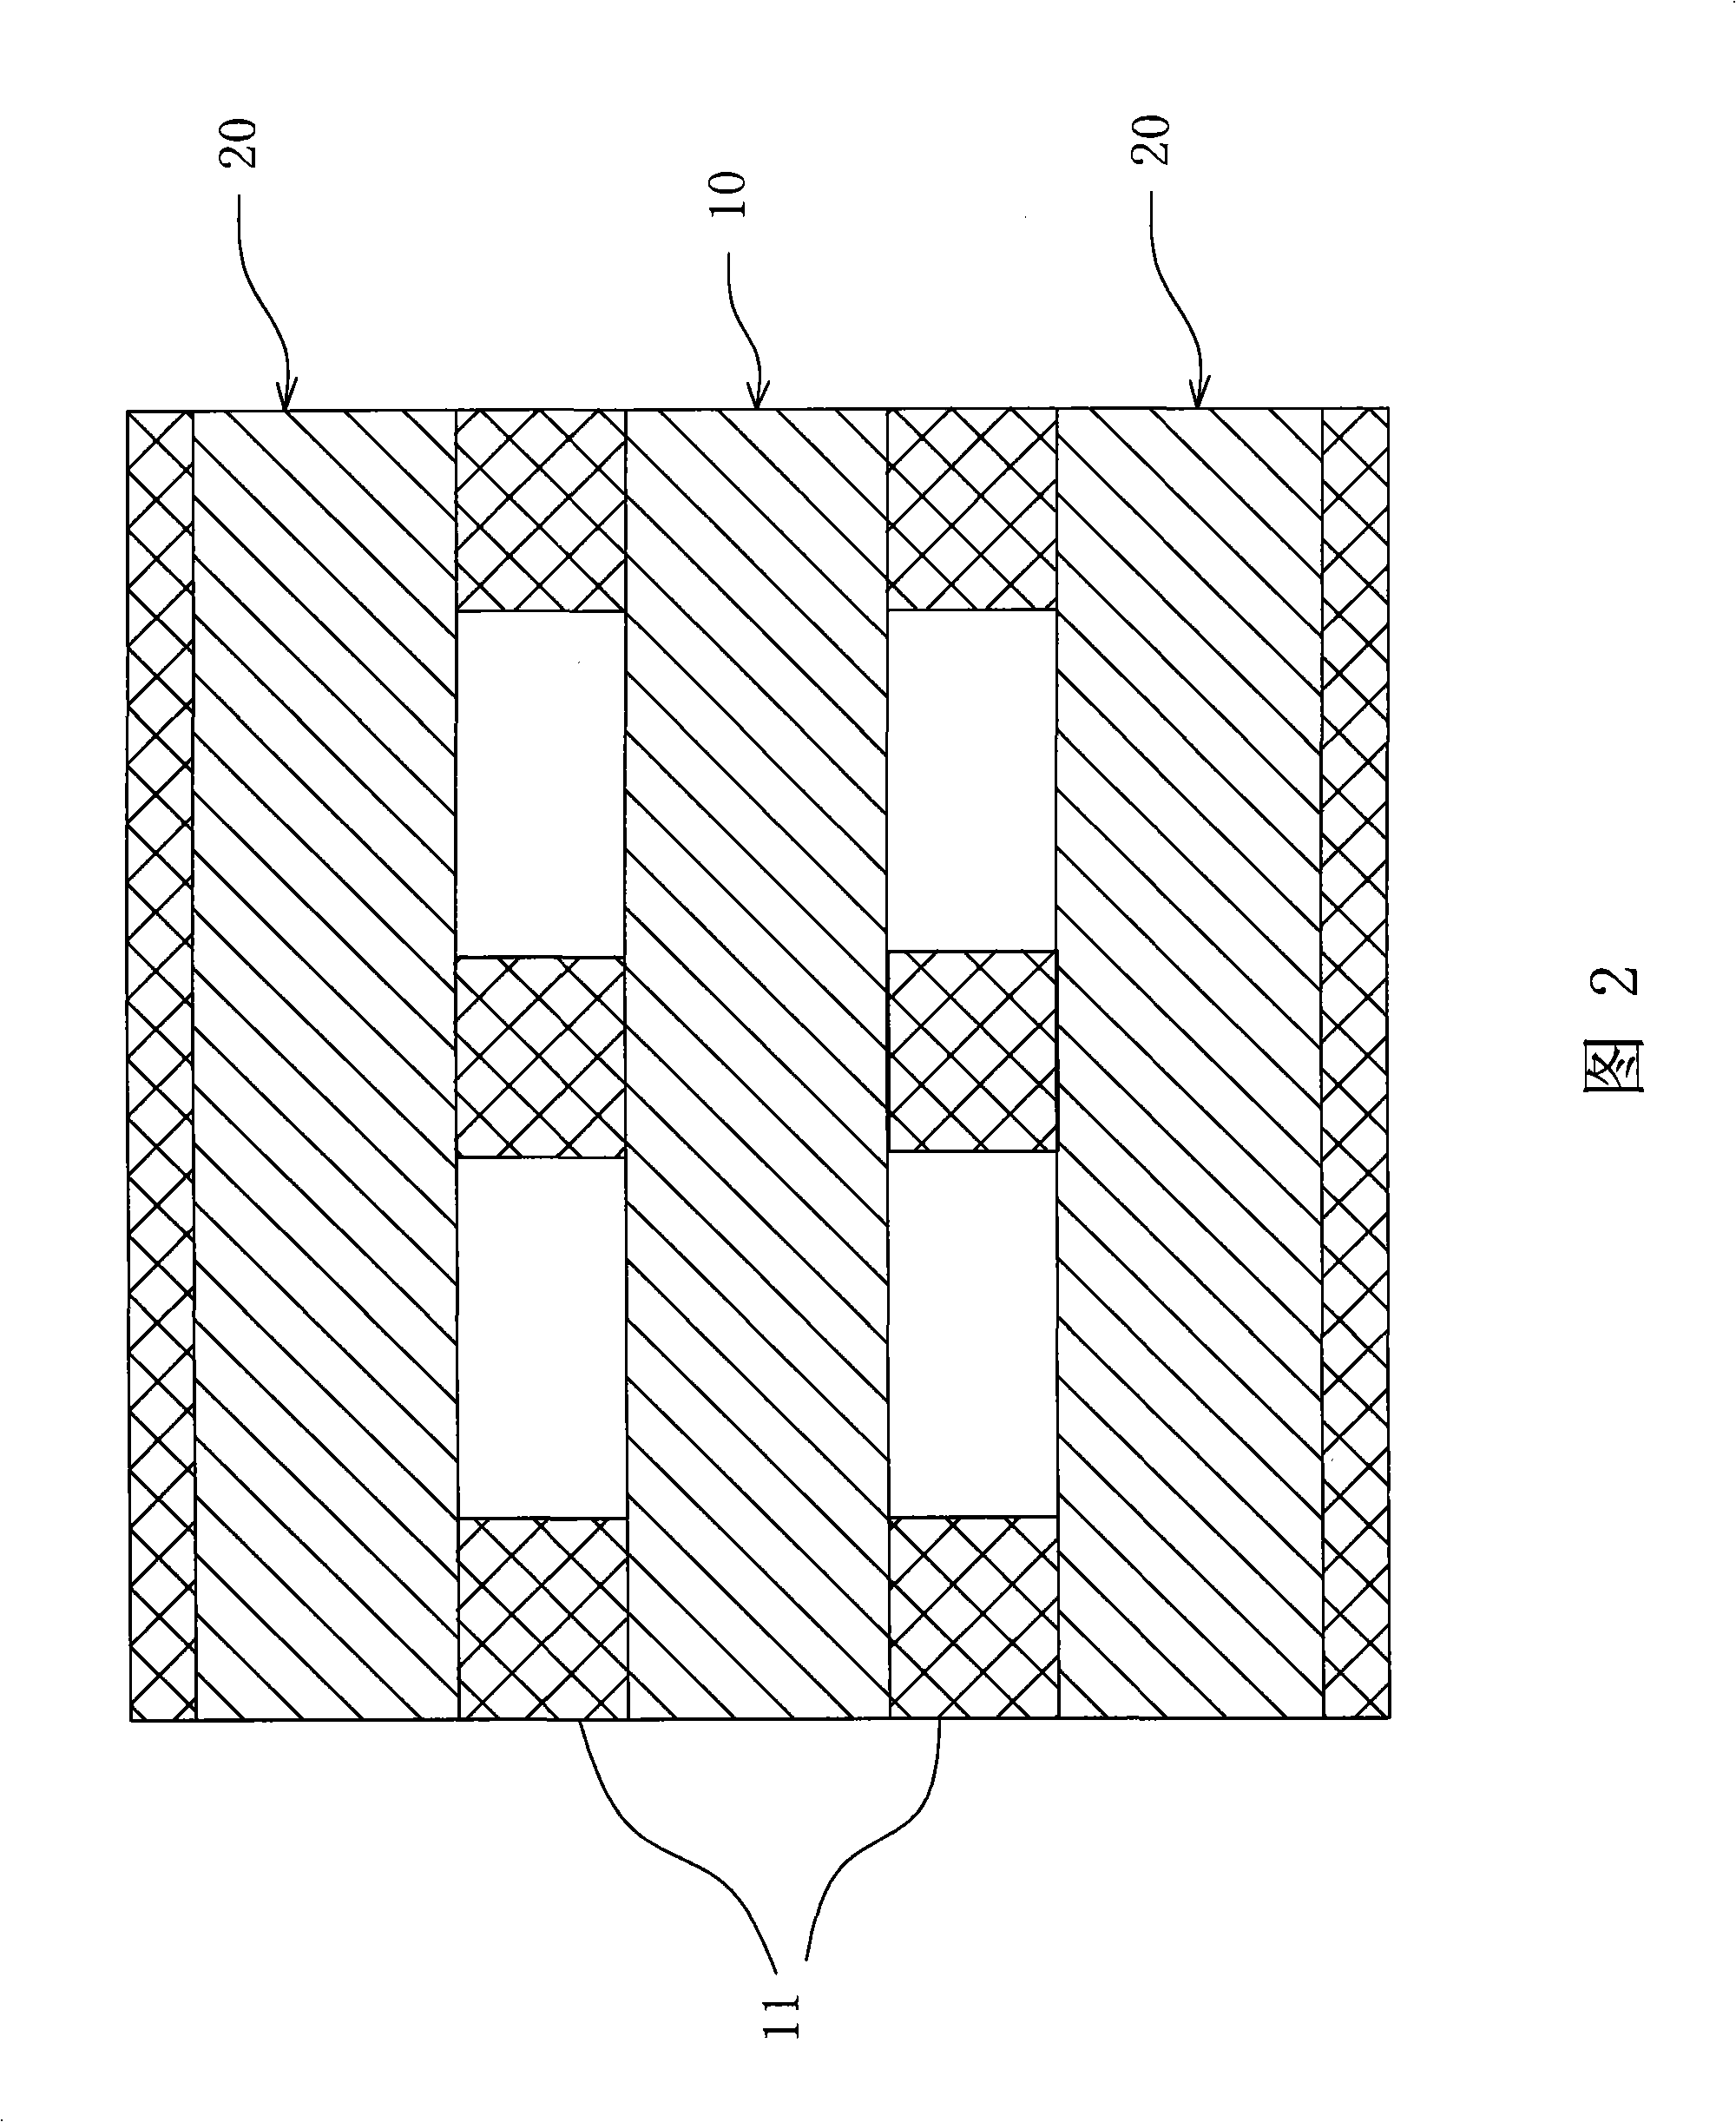 Control method for laser drilling contraposition accuracy of high-density lamination circuit board